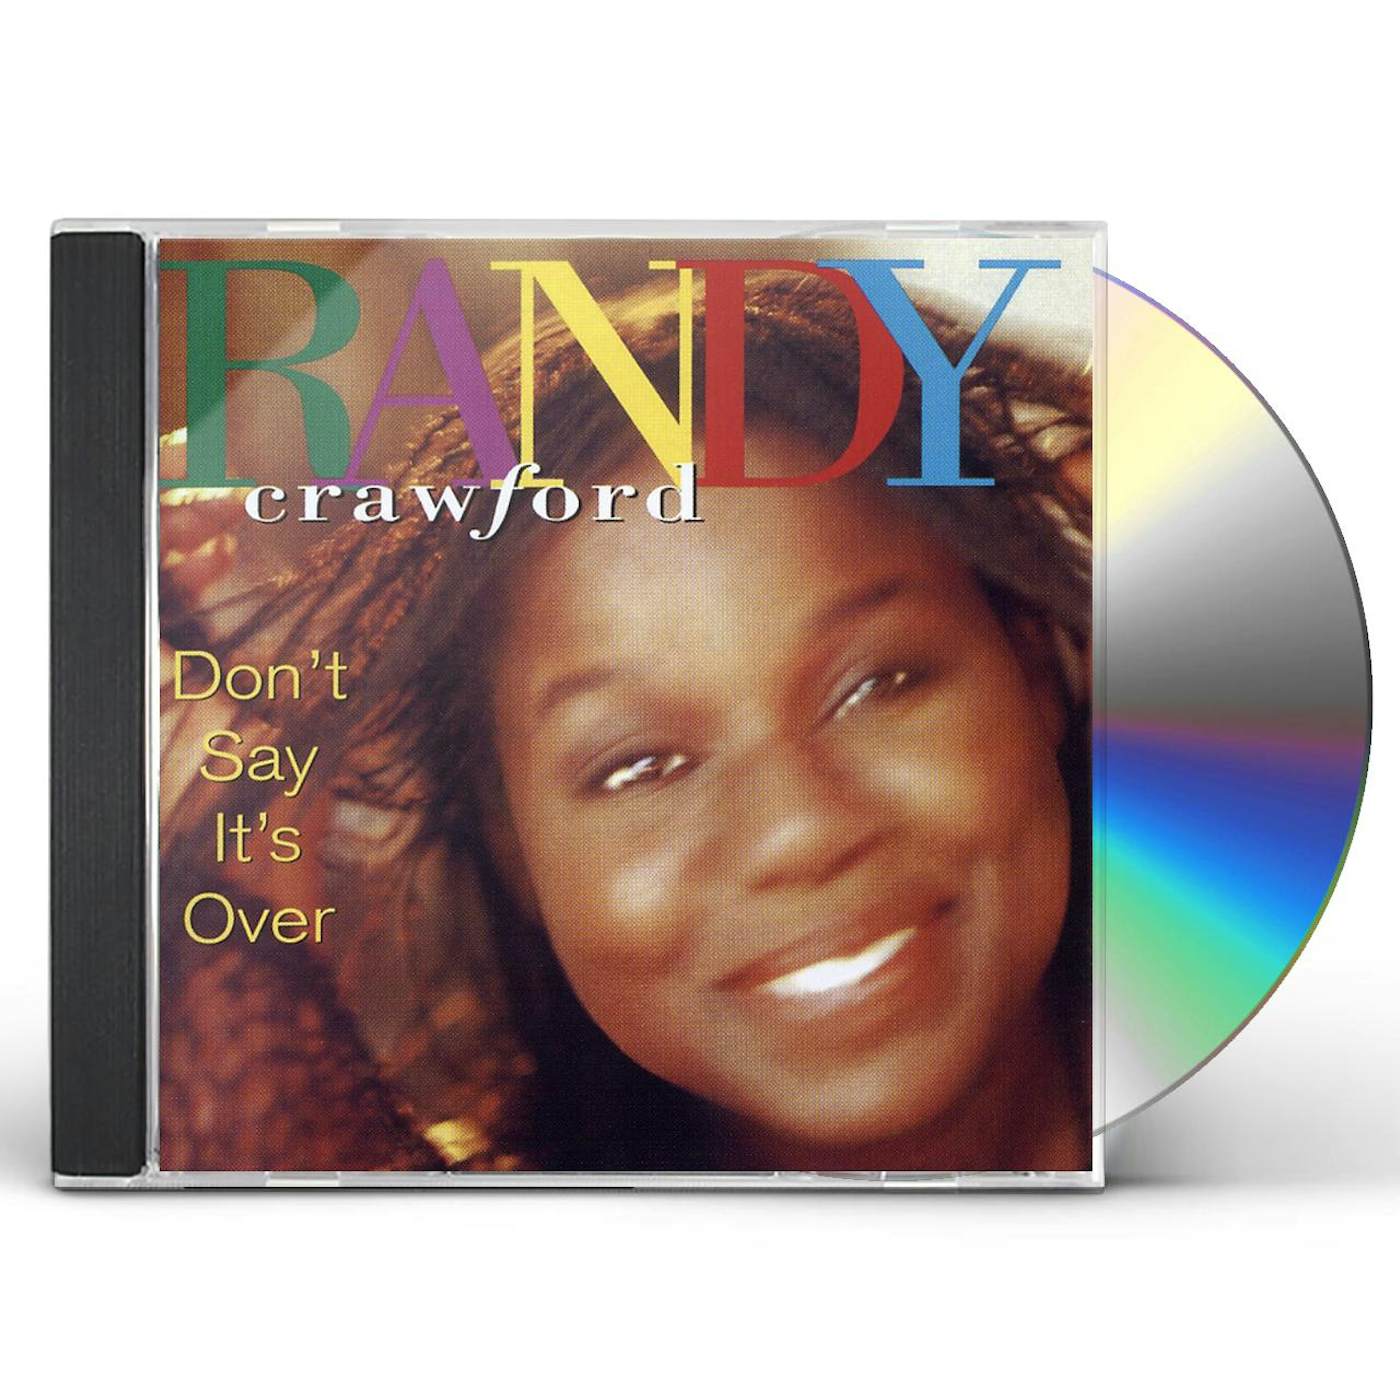 Randy Crawford DON'T SAY IT'S OVER CD